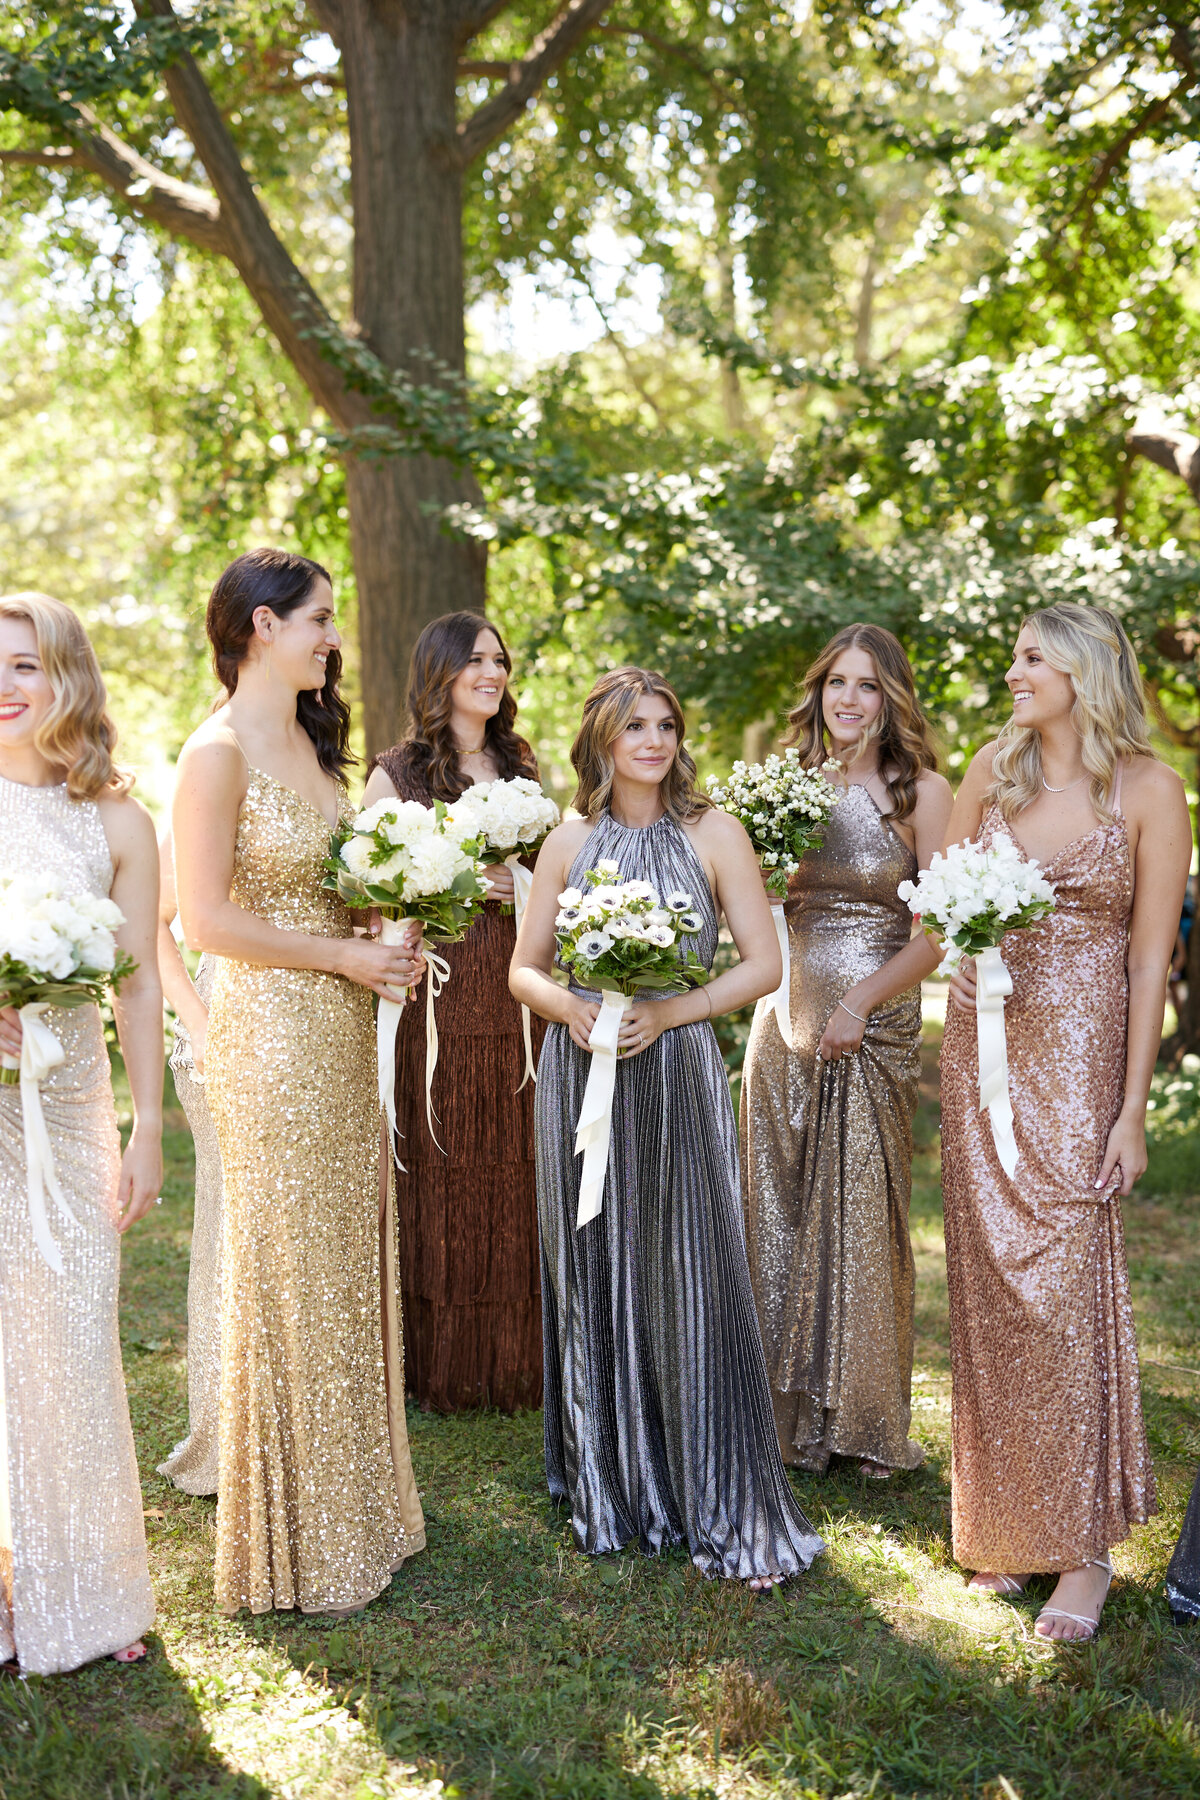 Bridal party in mismatched dresses